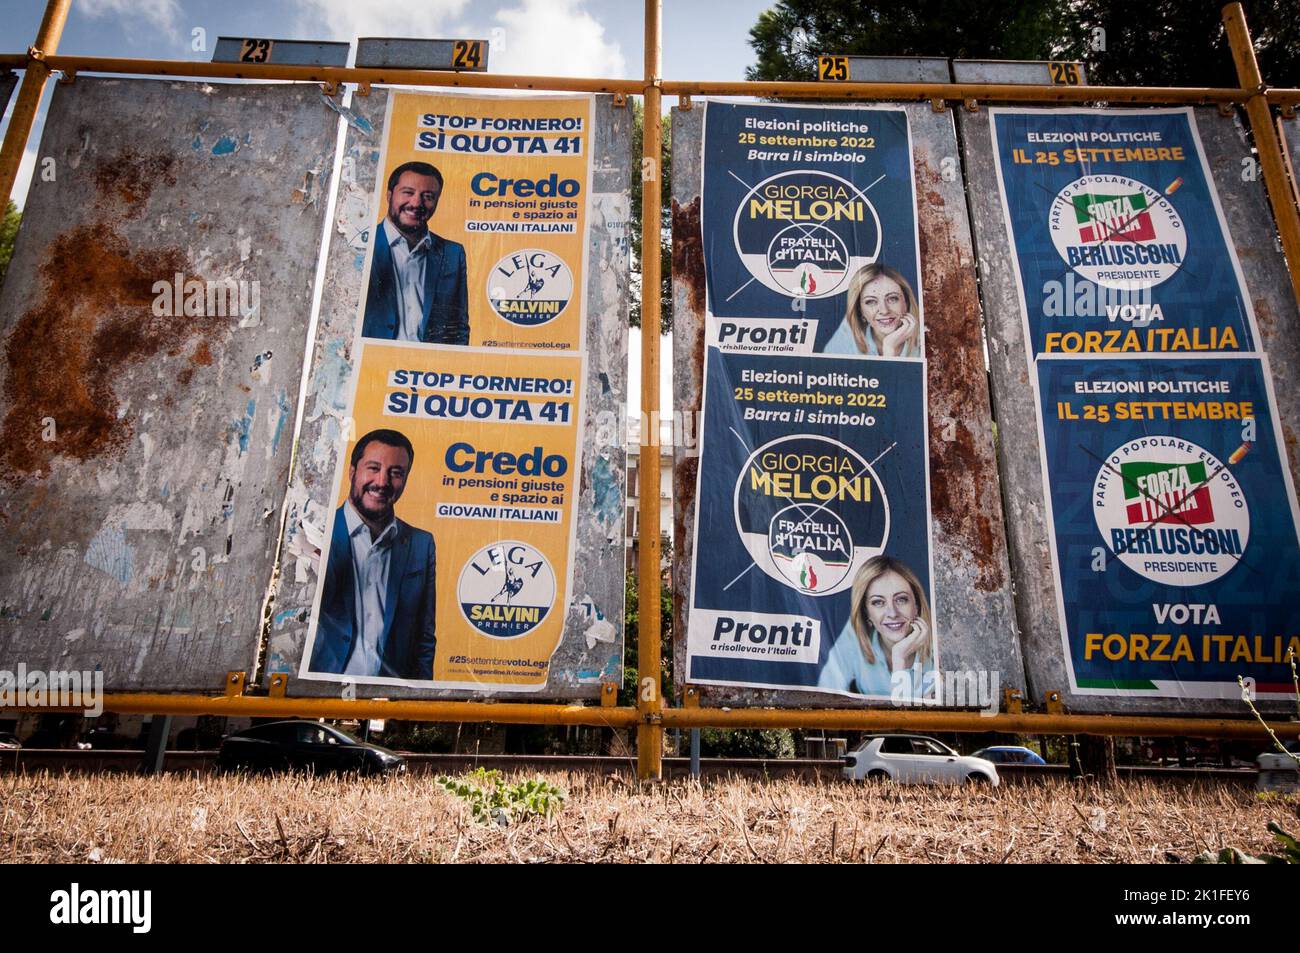 Rome, Italy. 17th Sep, 2022. ROME, ITALY - SEPTEMBER 17, 2022 ROME, ITALY - SEPTEMBER 17, 2022 The electoral poster of Matteo Salvini, leader of the Lega party, and the electoral poster of Giorgia Meloni, leader of the Fratelli d'Italia party leaders, and poster Forza Italia political party ahead of the upcoming September 25 general elections for the renewal of the Chamber of Deputies and the Senate of the Republic on September 17, 2022 in Rome. On September 25, 2022, voters will elect all members of the two chambers of the Italian parliament. After a constitutional referendum, the size Stock Photo